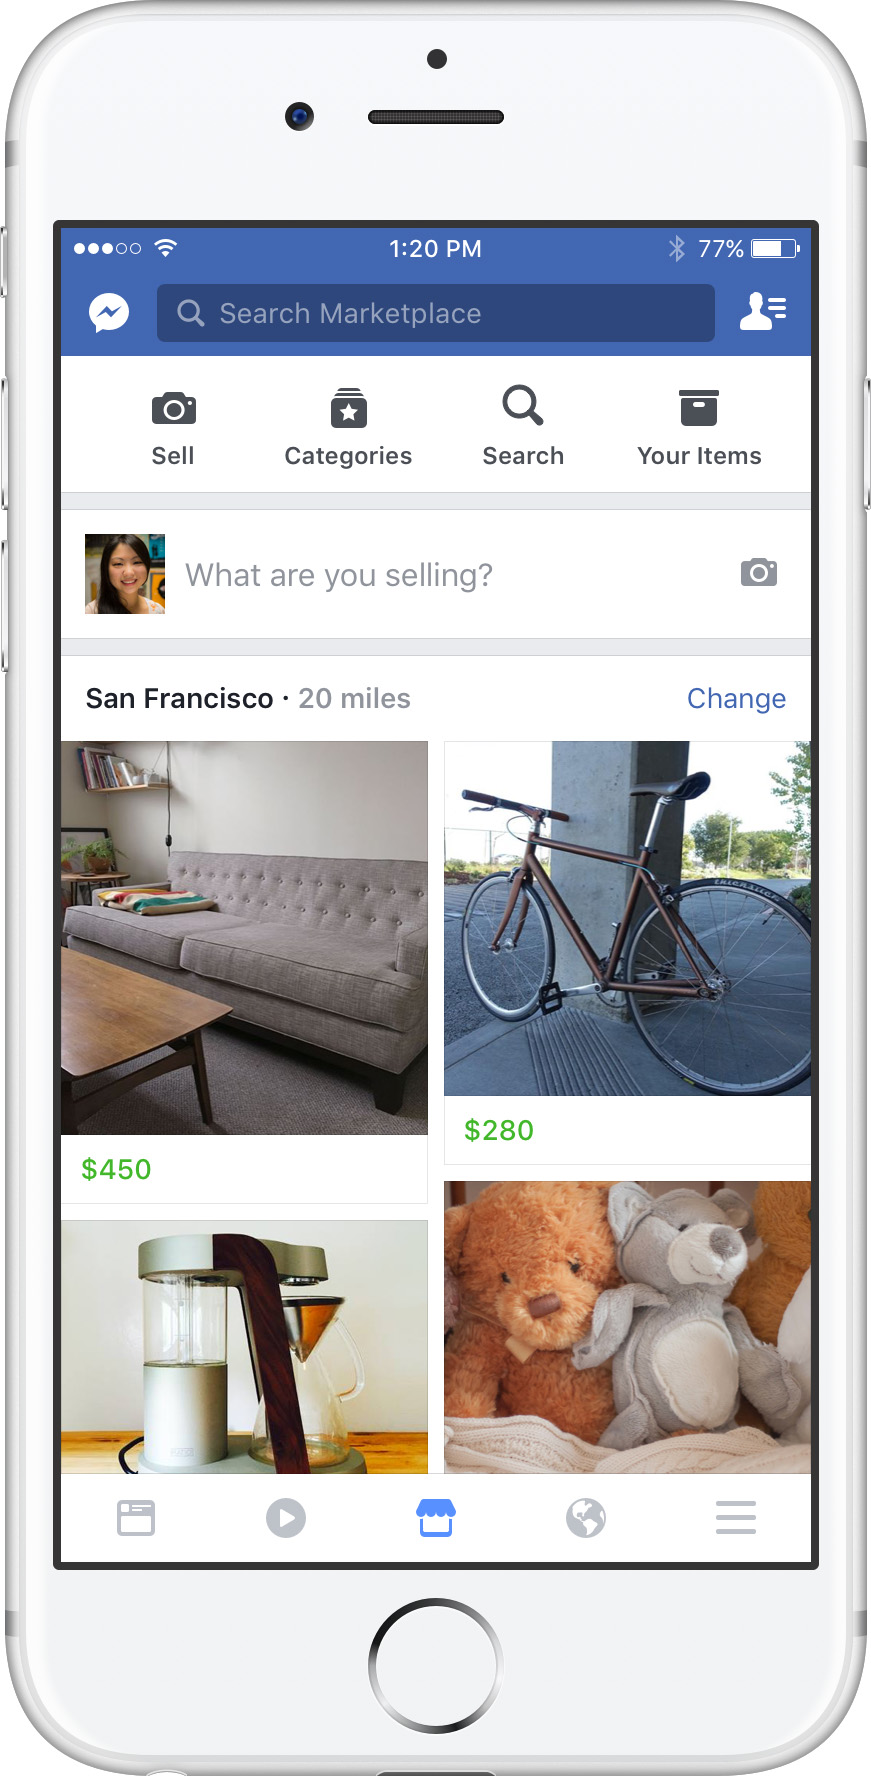 Facebook Launches Marketplace to Rival Craigslist [Video]